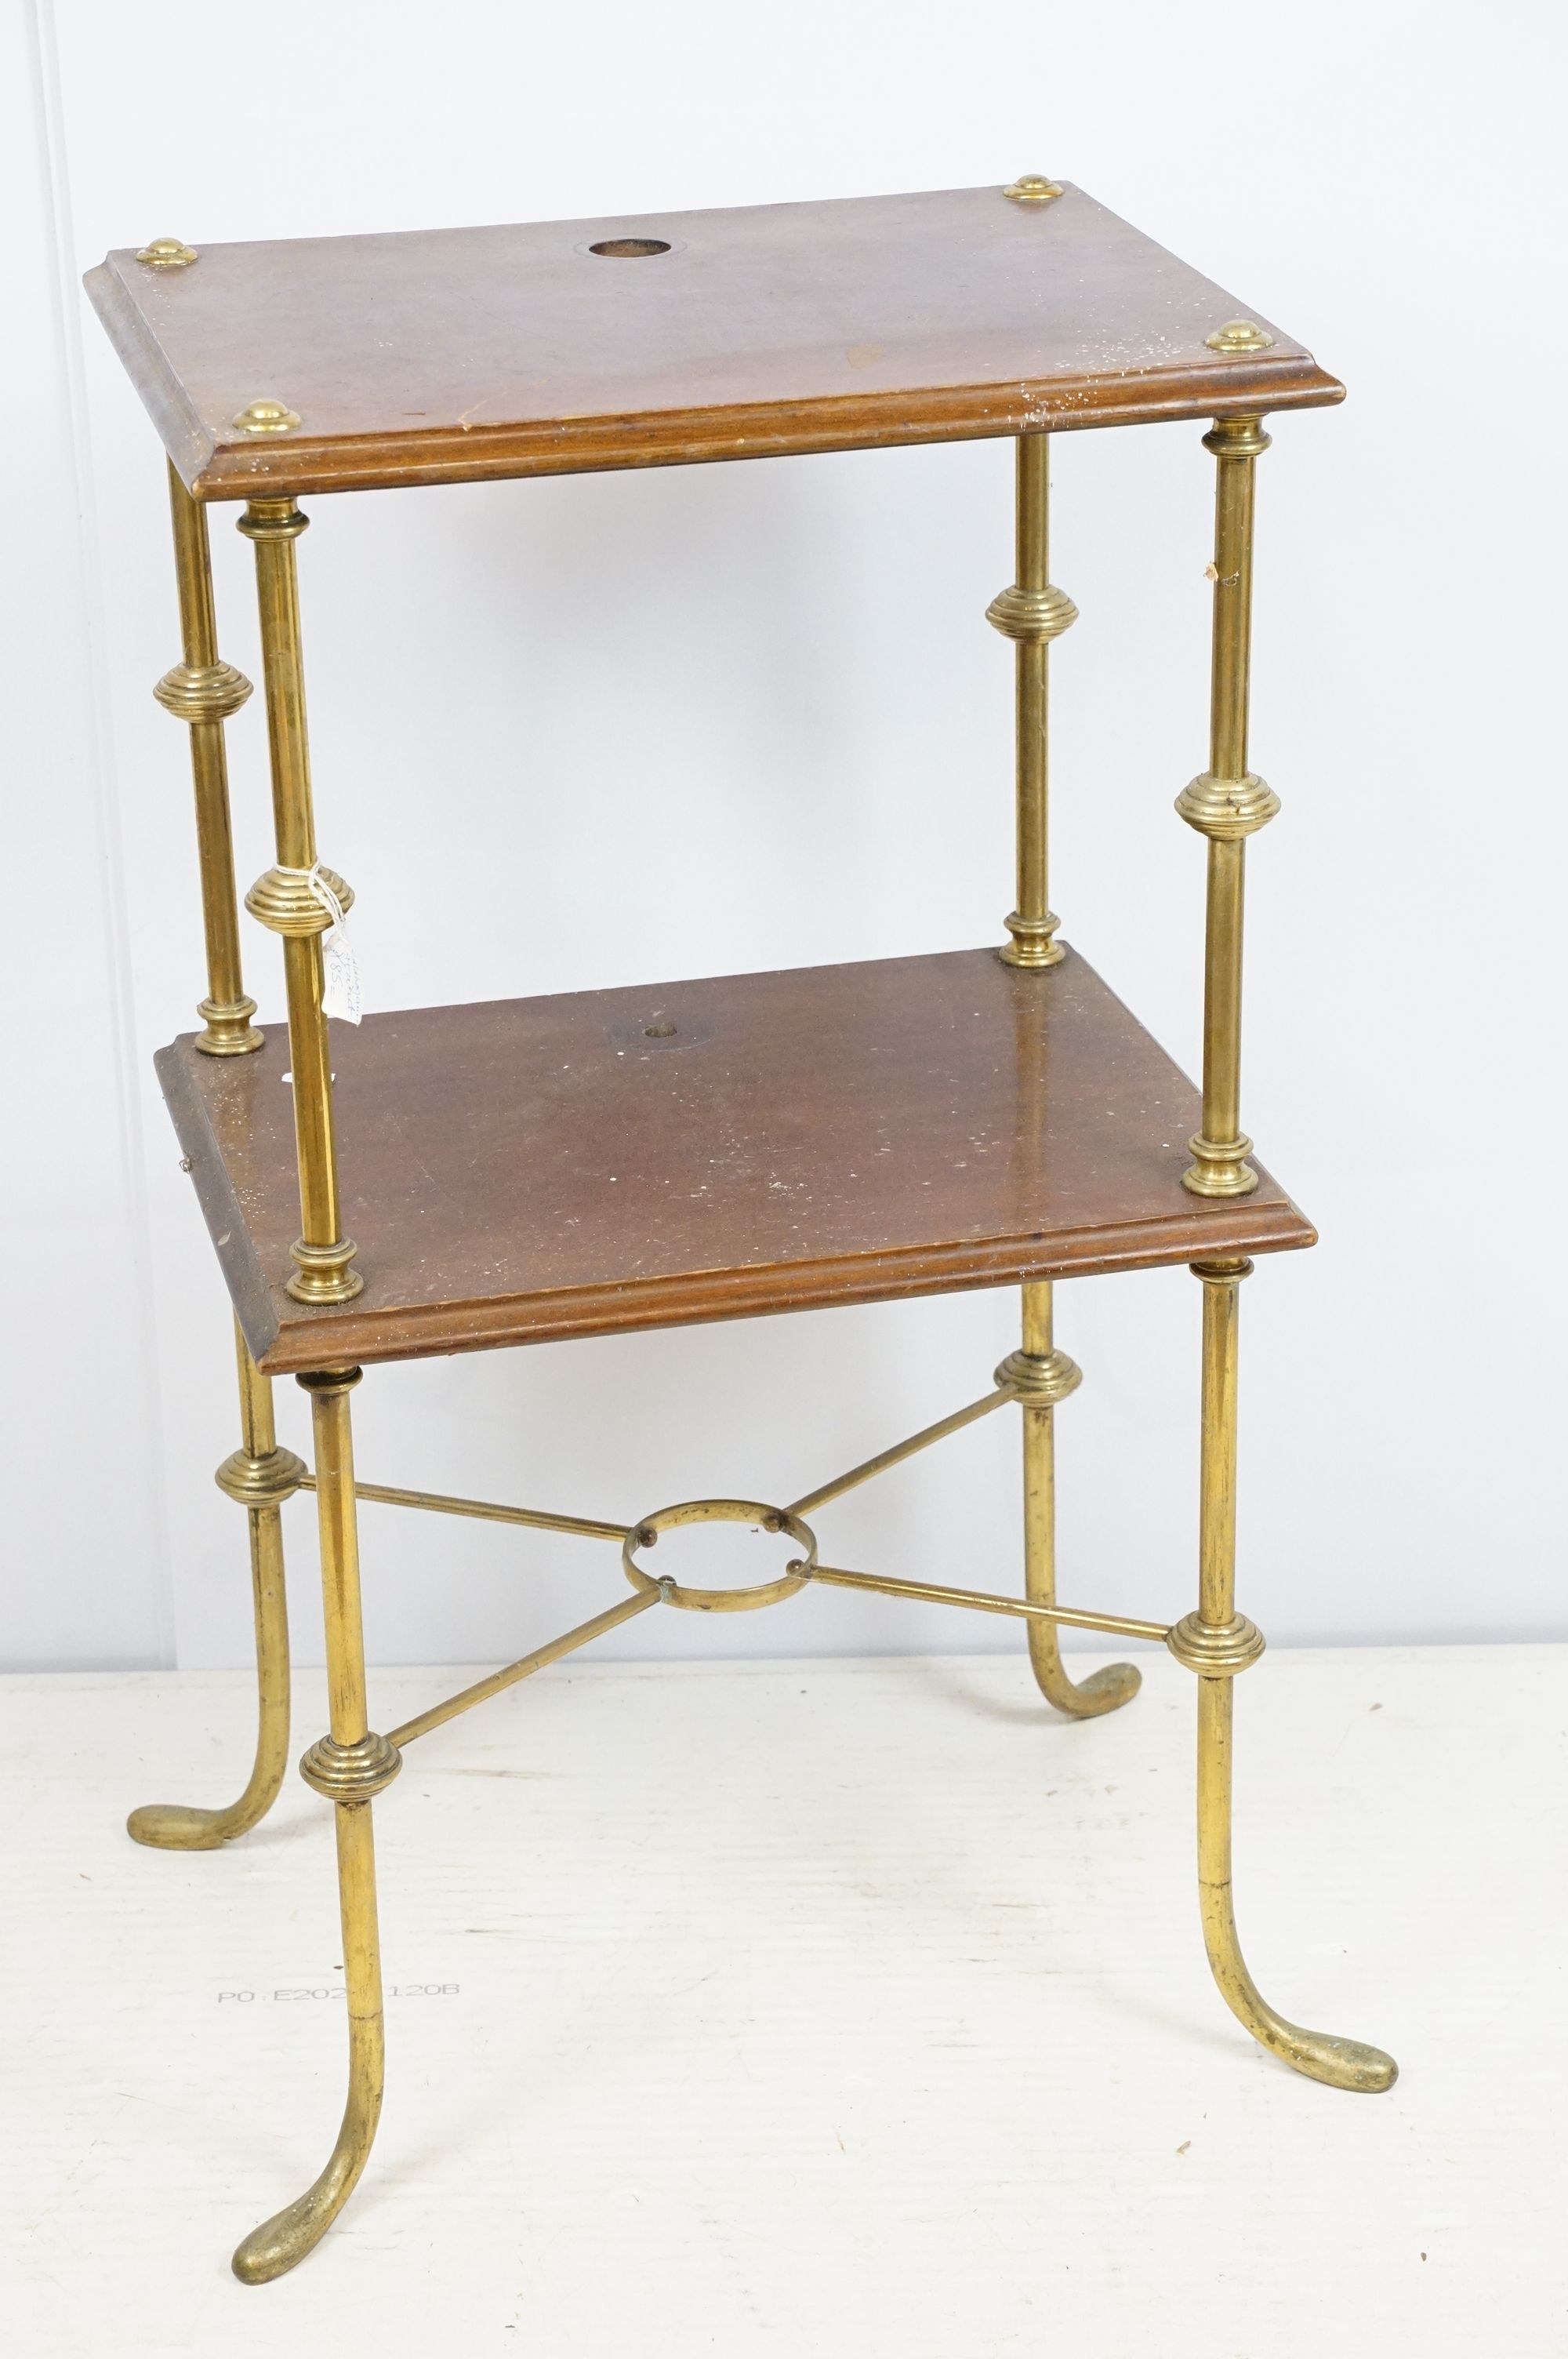 Mahogany two tier table with brass supports and x-stretcher, 80cm high x 45cm wide x 36cm deep